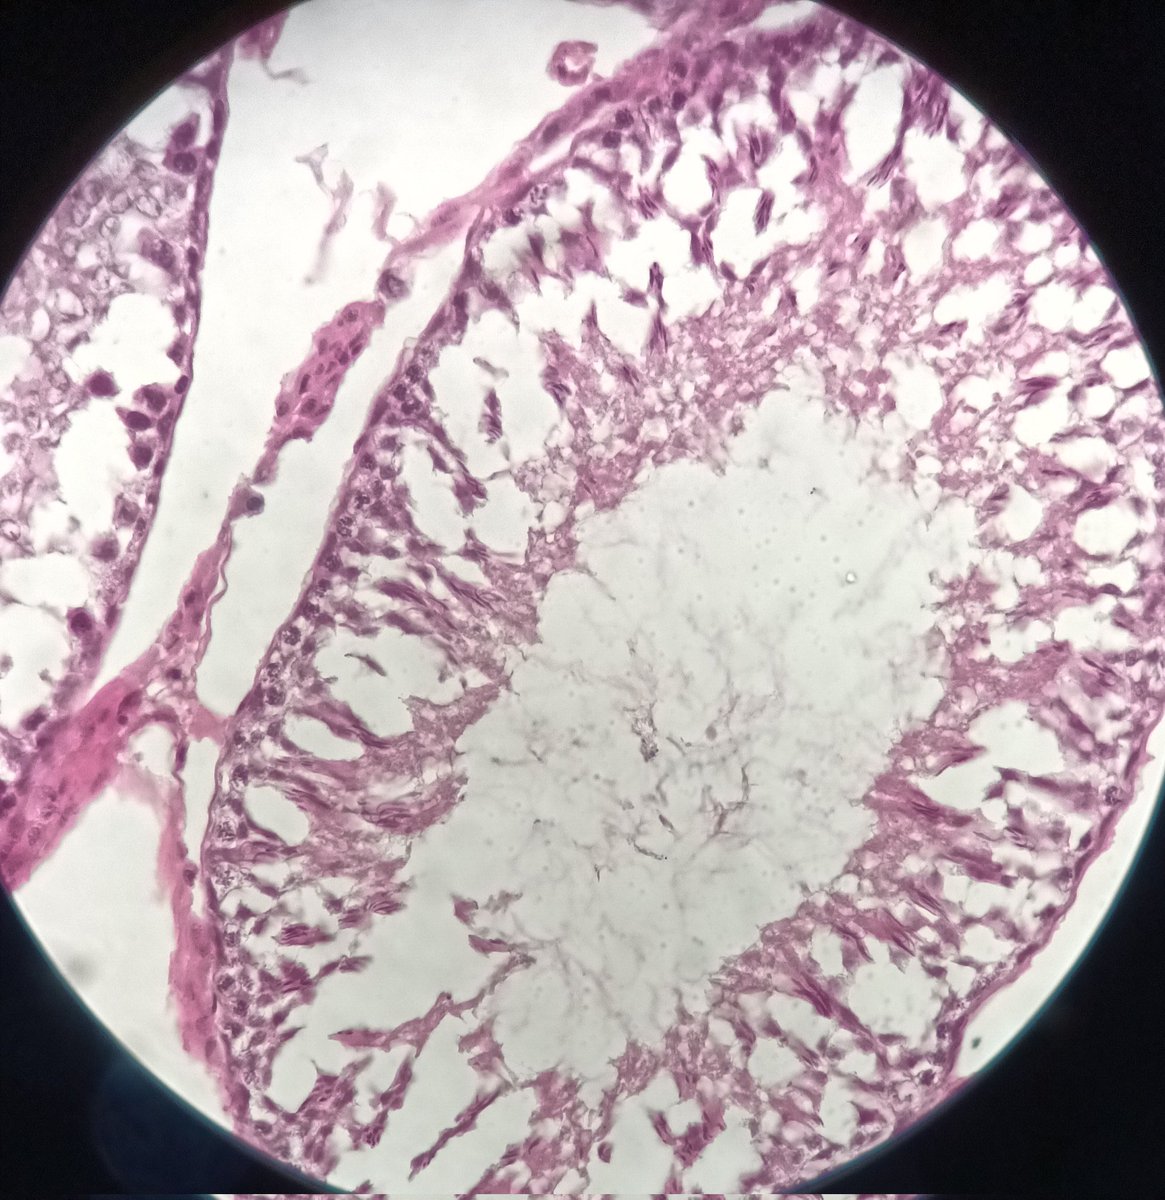 @KalaKemangga That reminds me of taking pics through microscope with phone for animal cells development practicum 2 semester ago